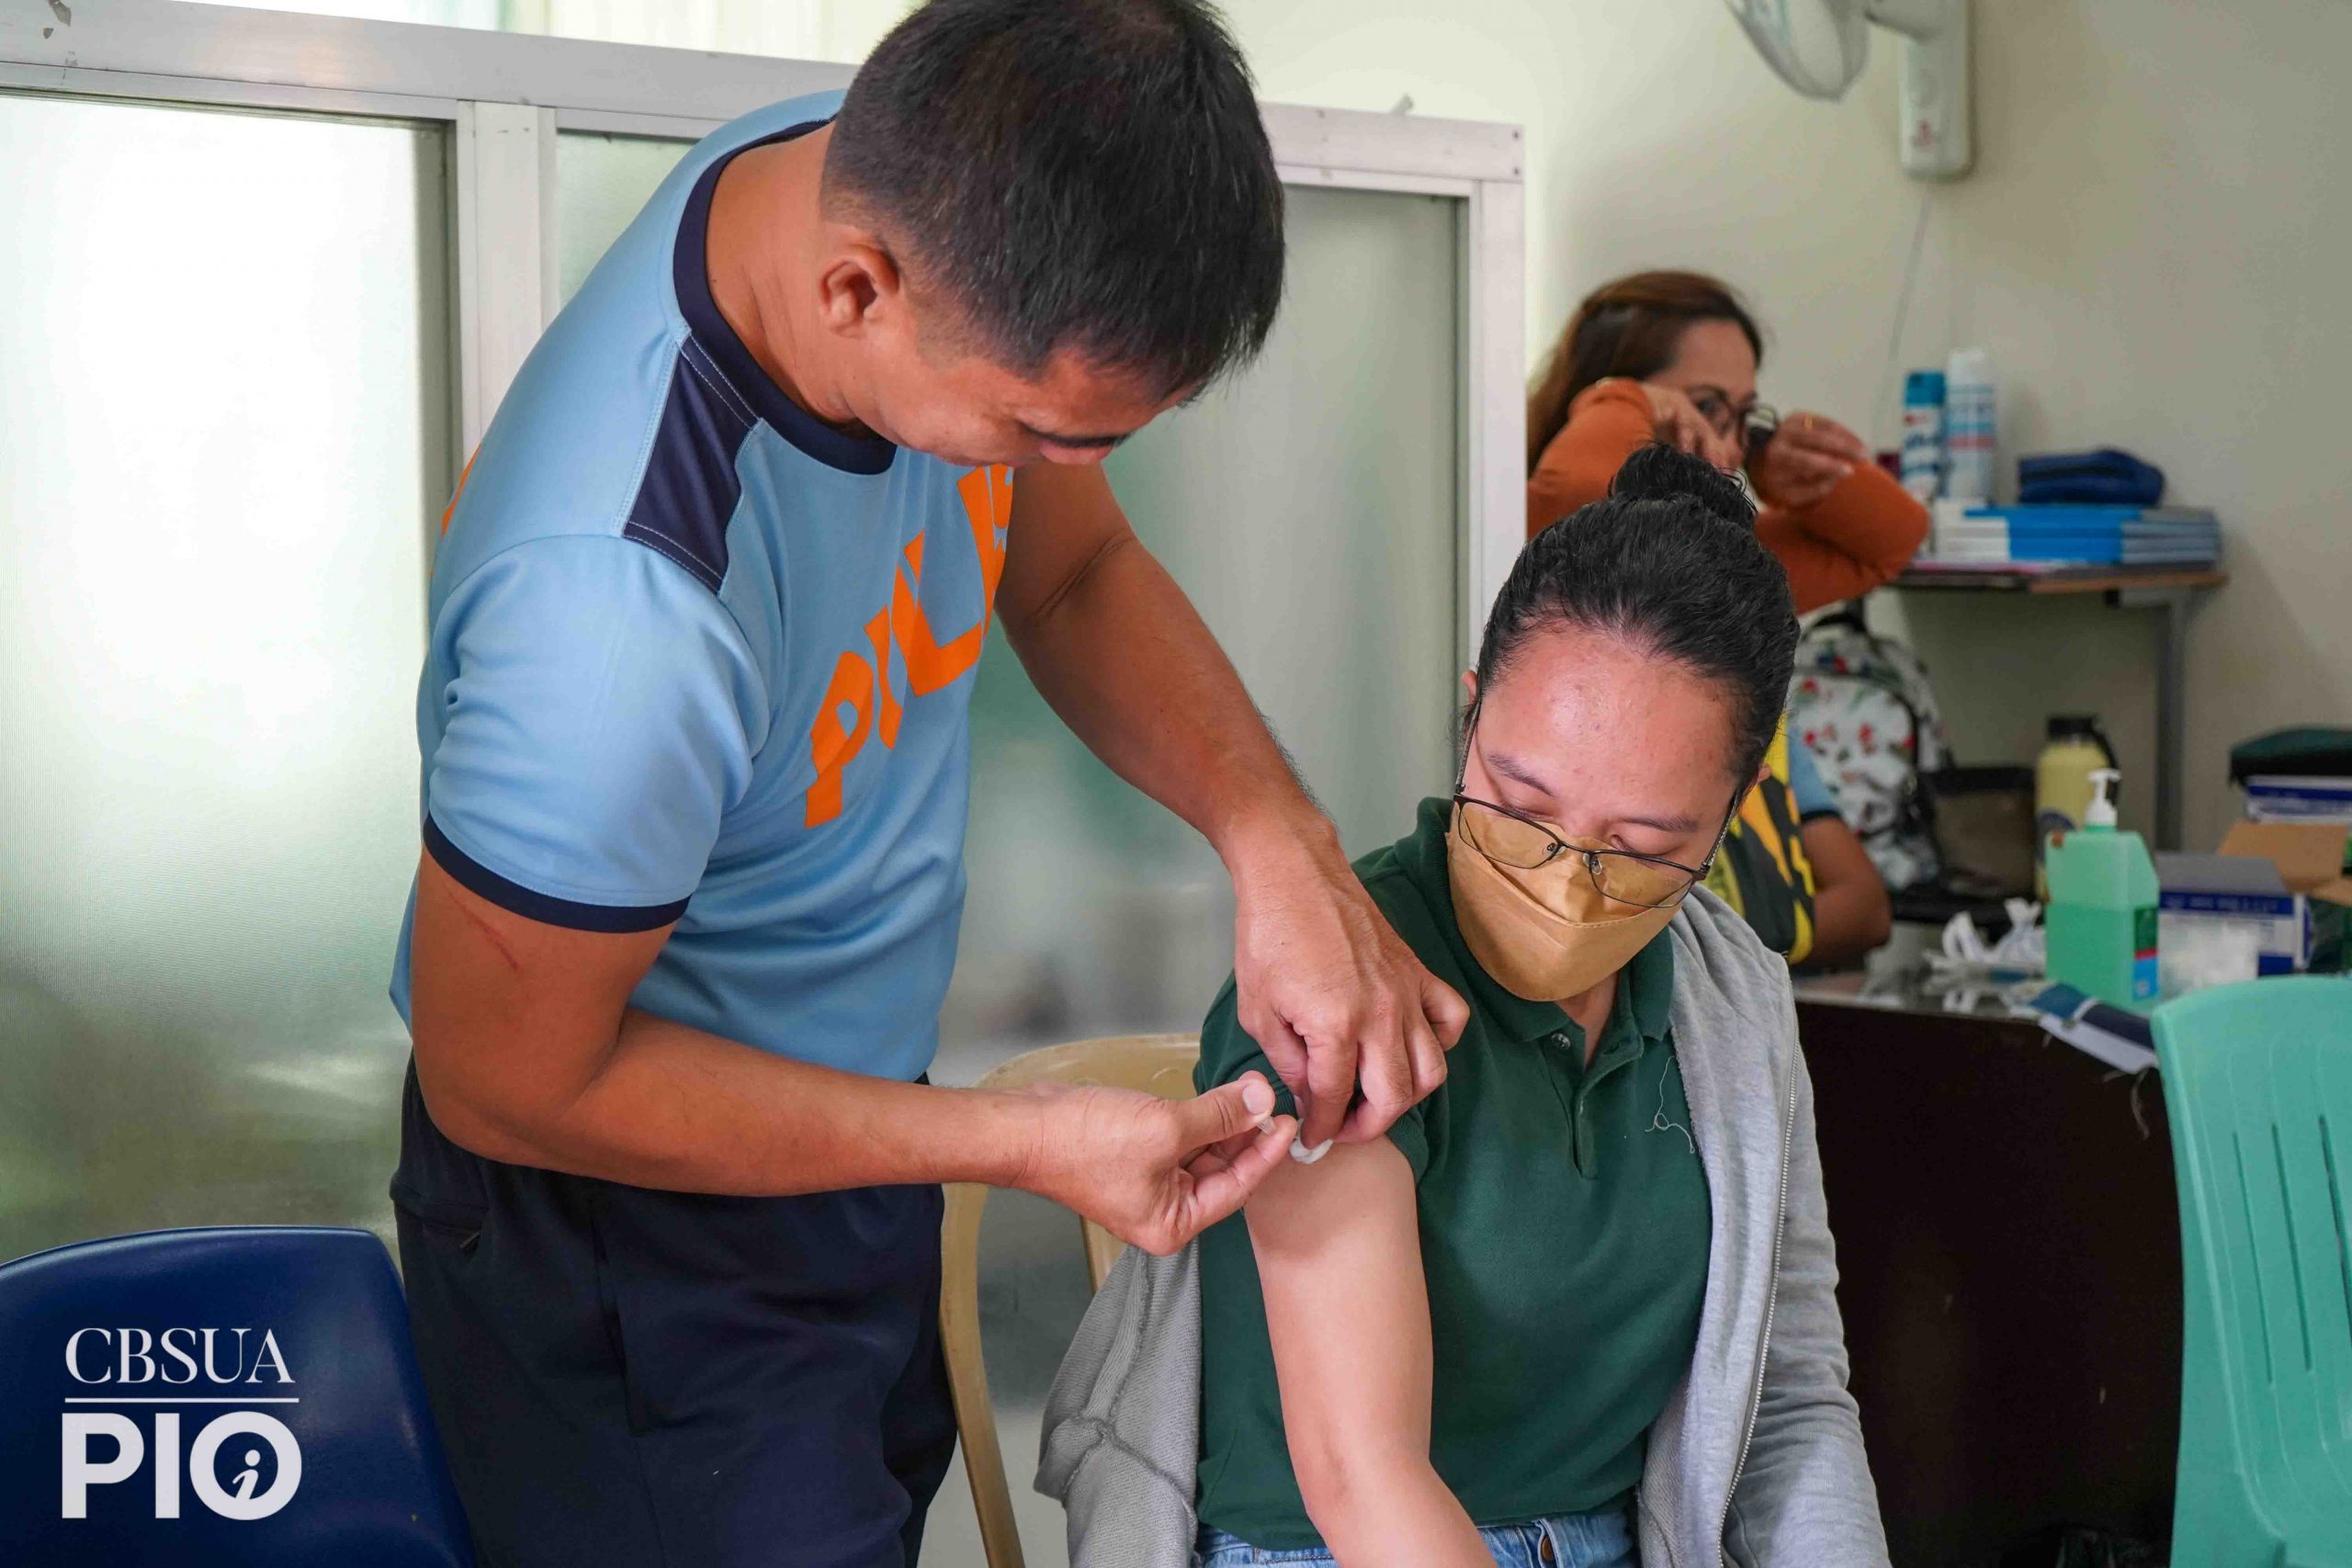 CBSUA ORGANIZES FLU VACCINATION FOR ITS PERSONNEL